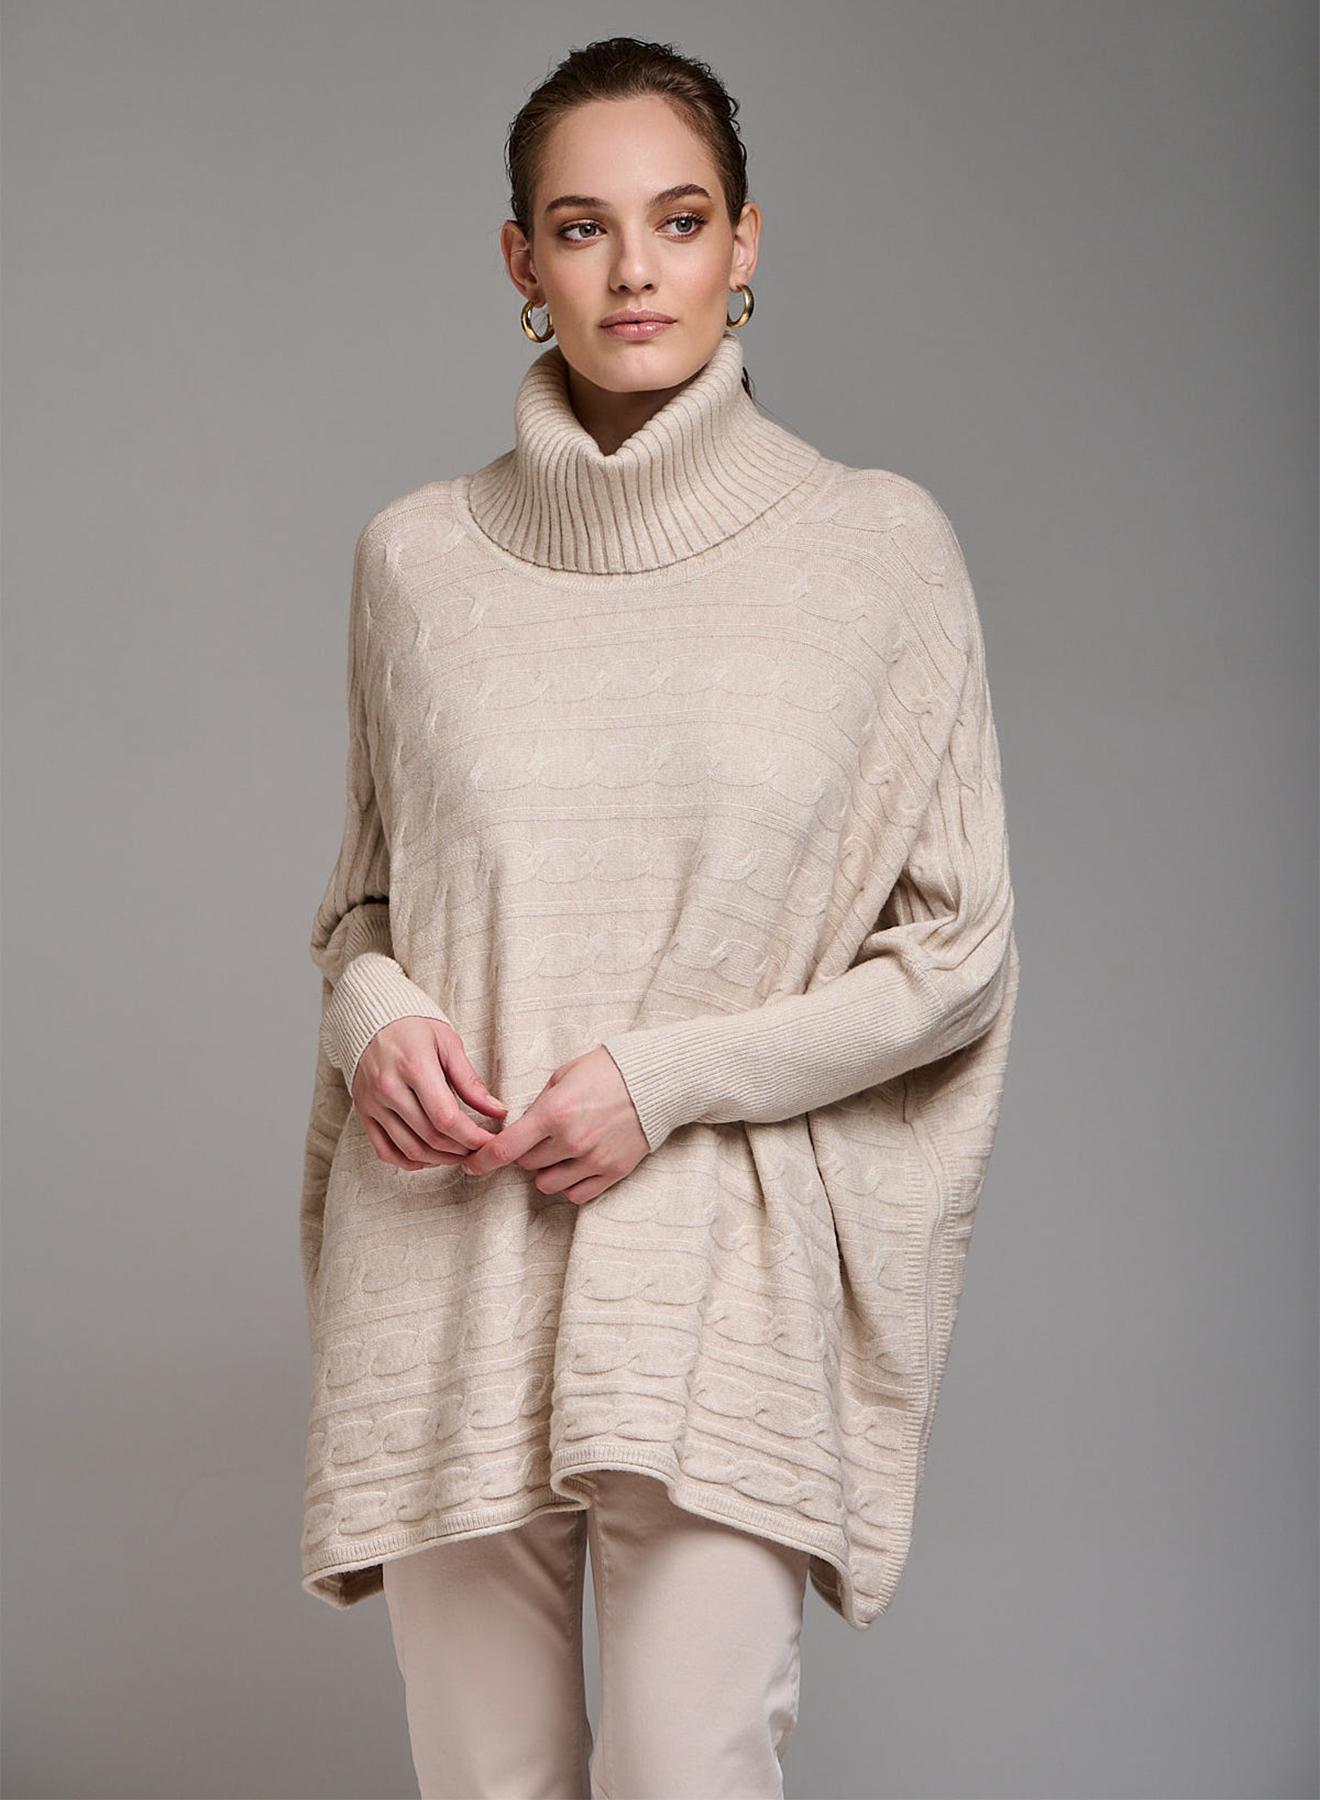 Oversized turtleneck sweater with textured details - 1